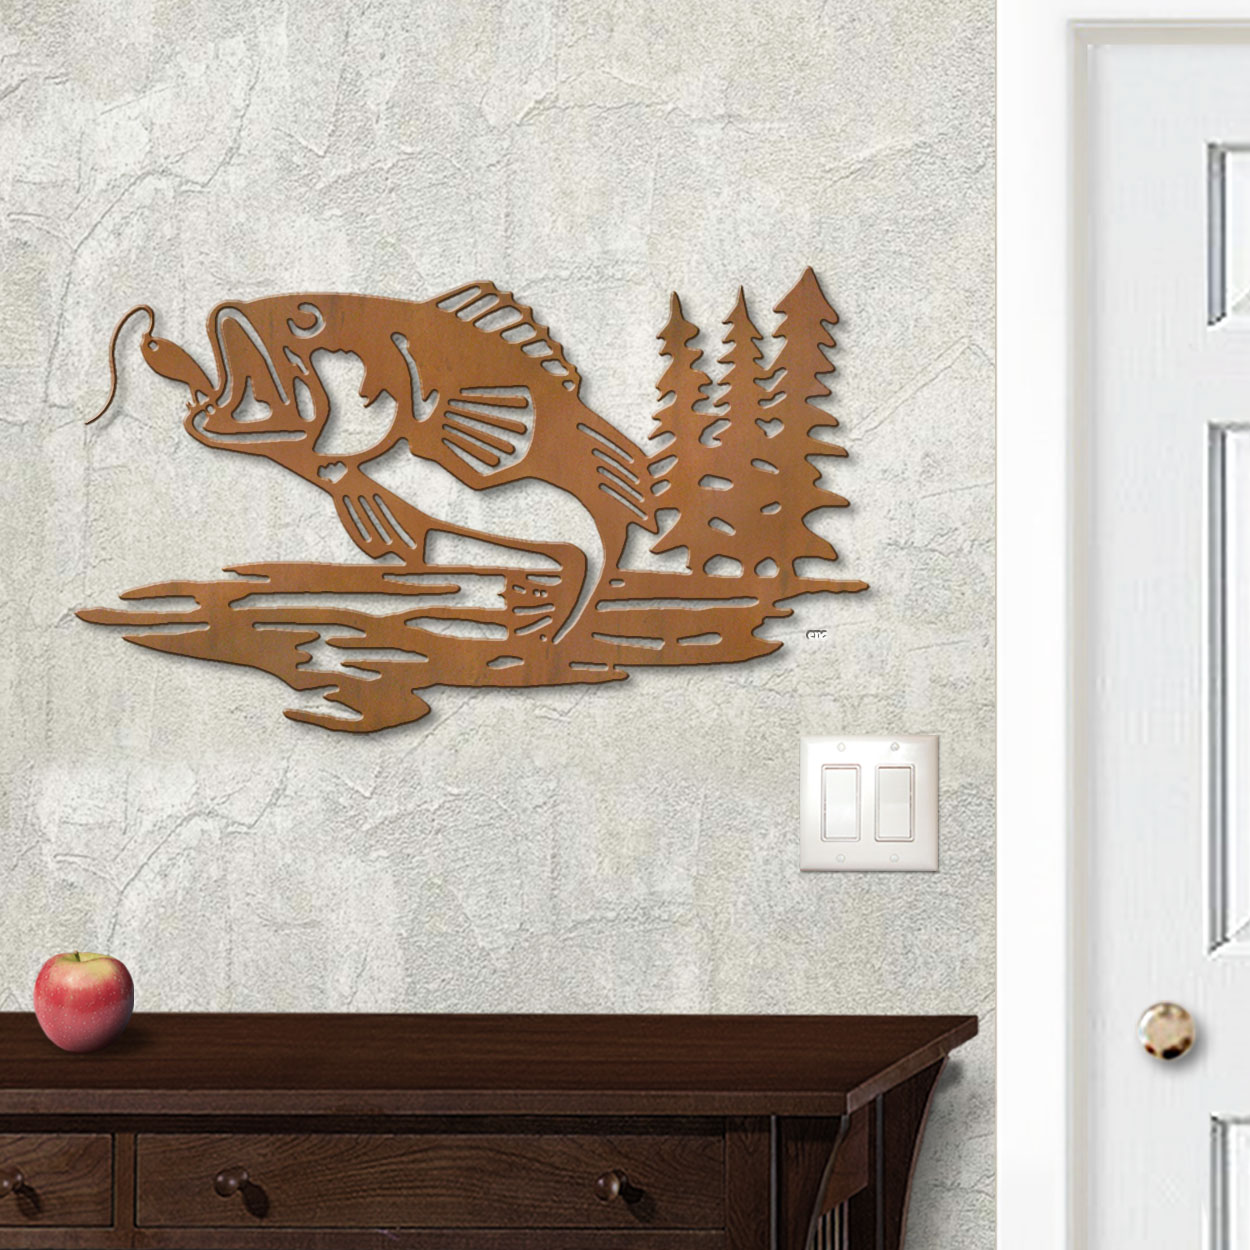 625041r - 18in or 24in Floating Metal Wall Art - Bass And Trees - Rust Patina